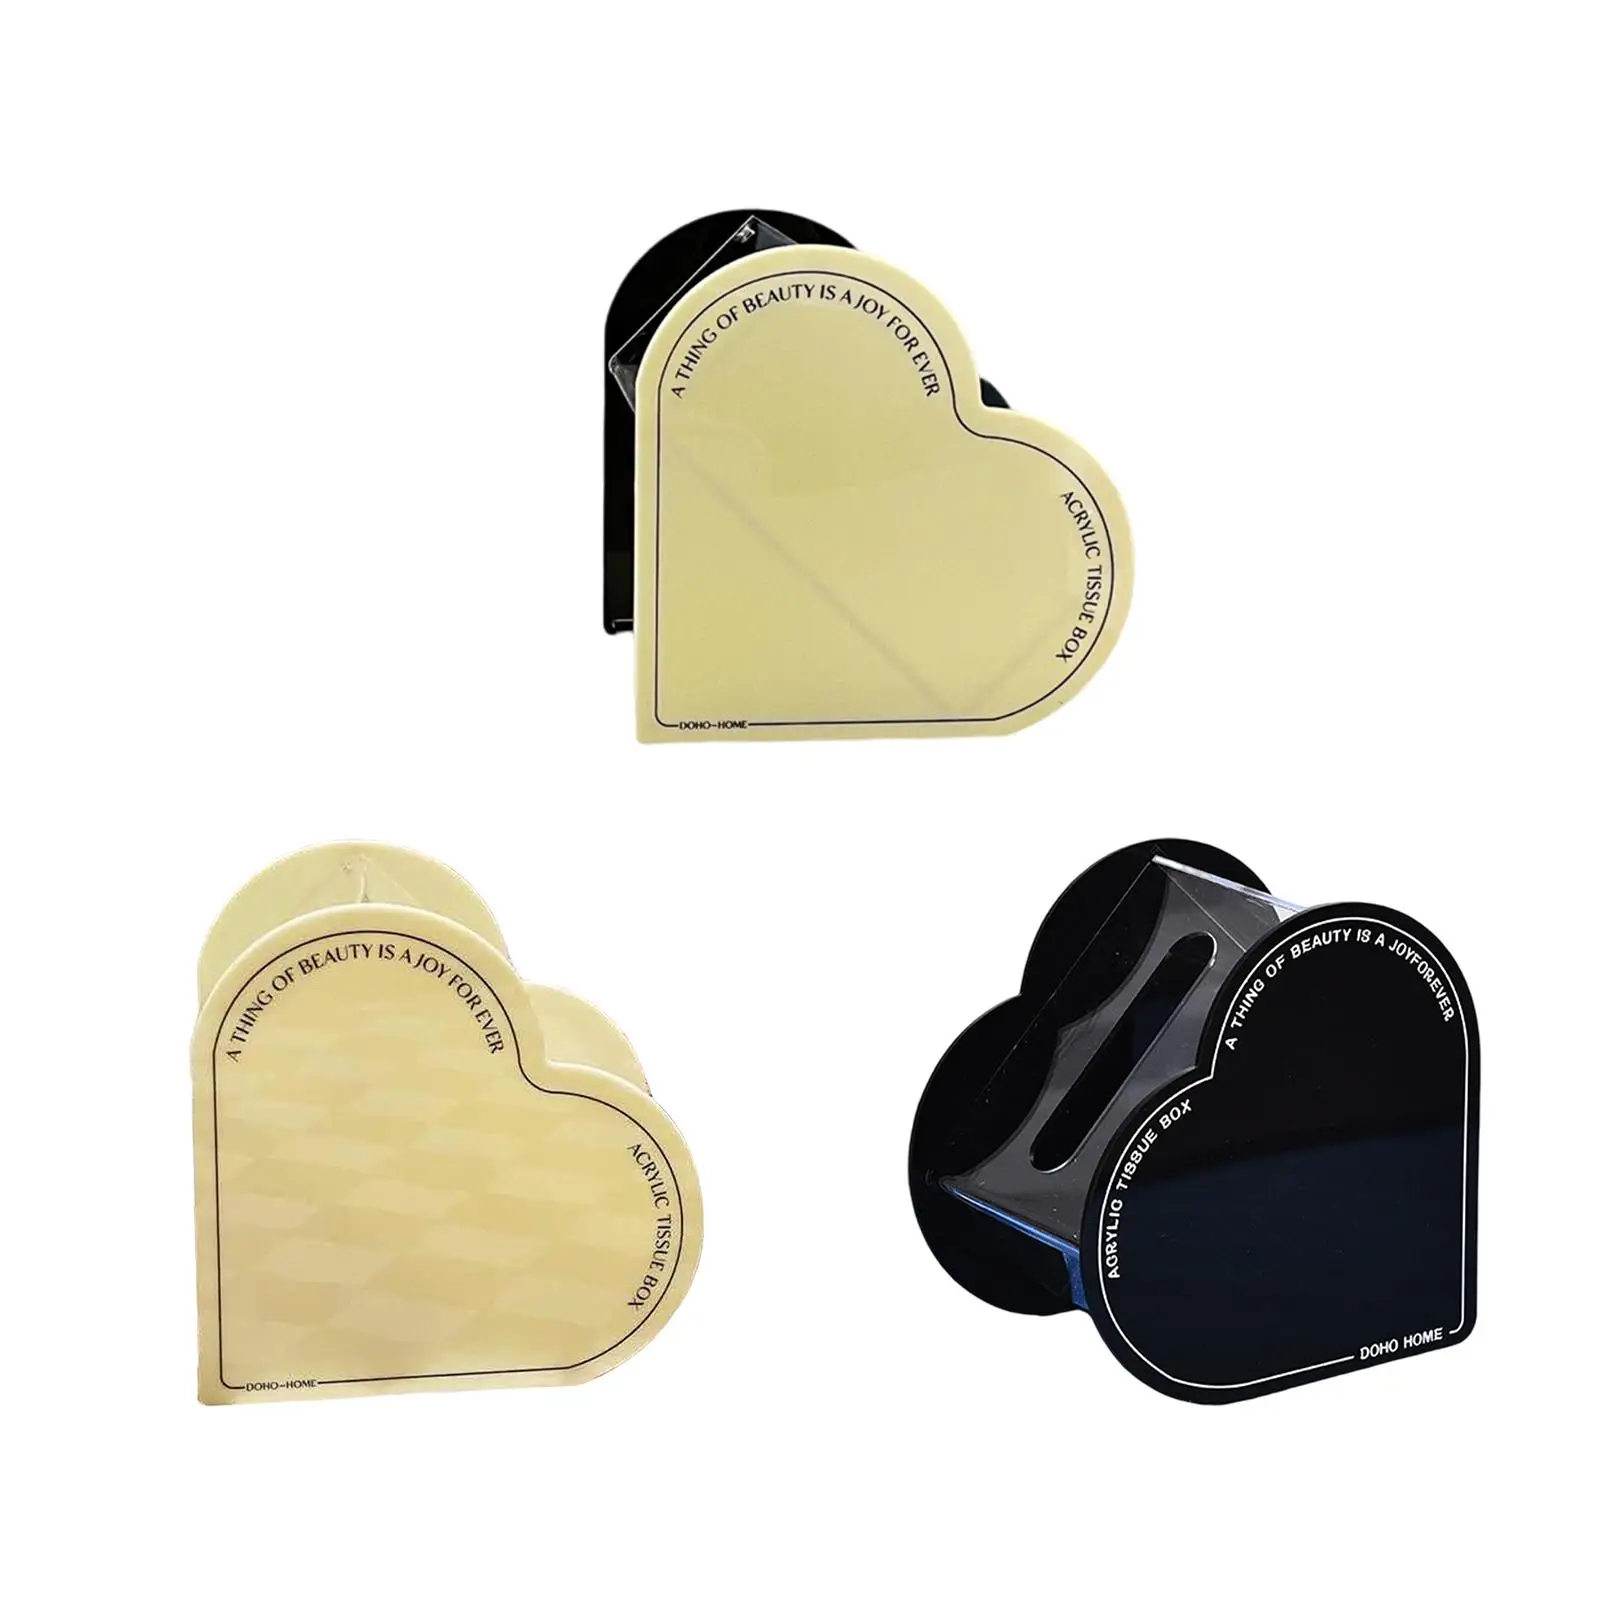 Heart Shaped Tissue Box Cover Household Storage Container Toilet Paper Storage Holder Bathroom Tissue Holders for Decor Bathroom